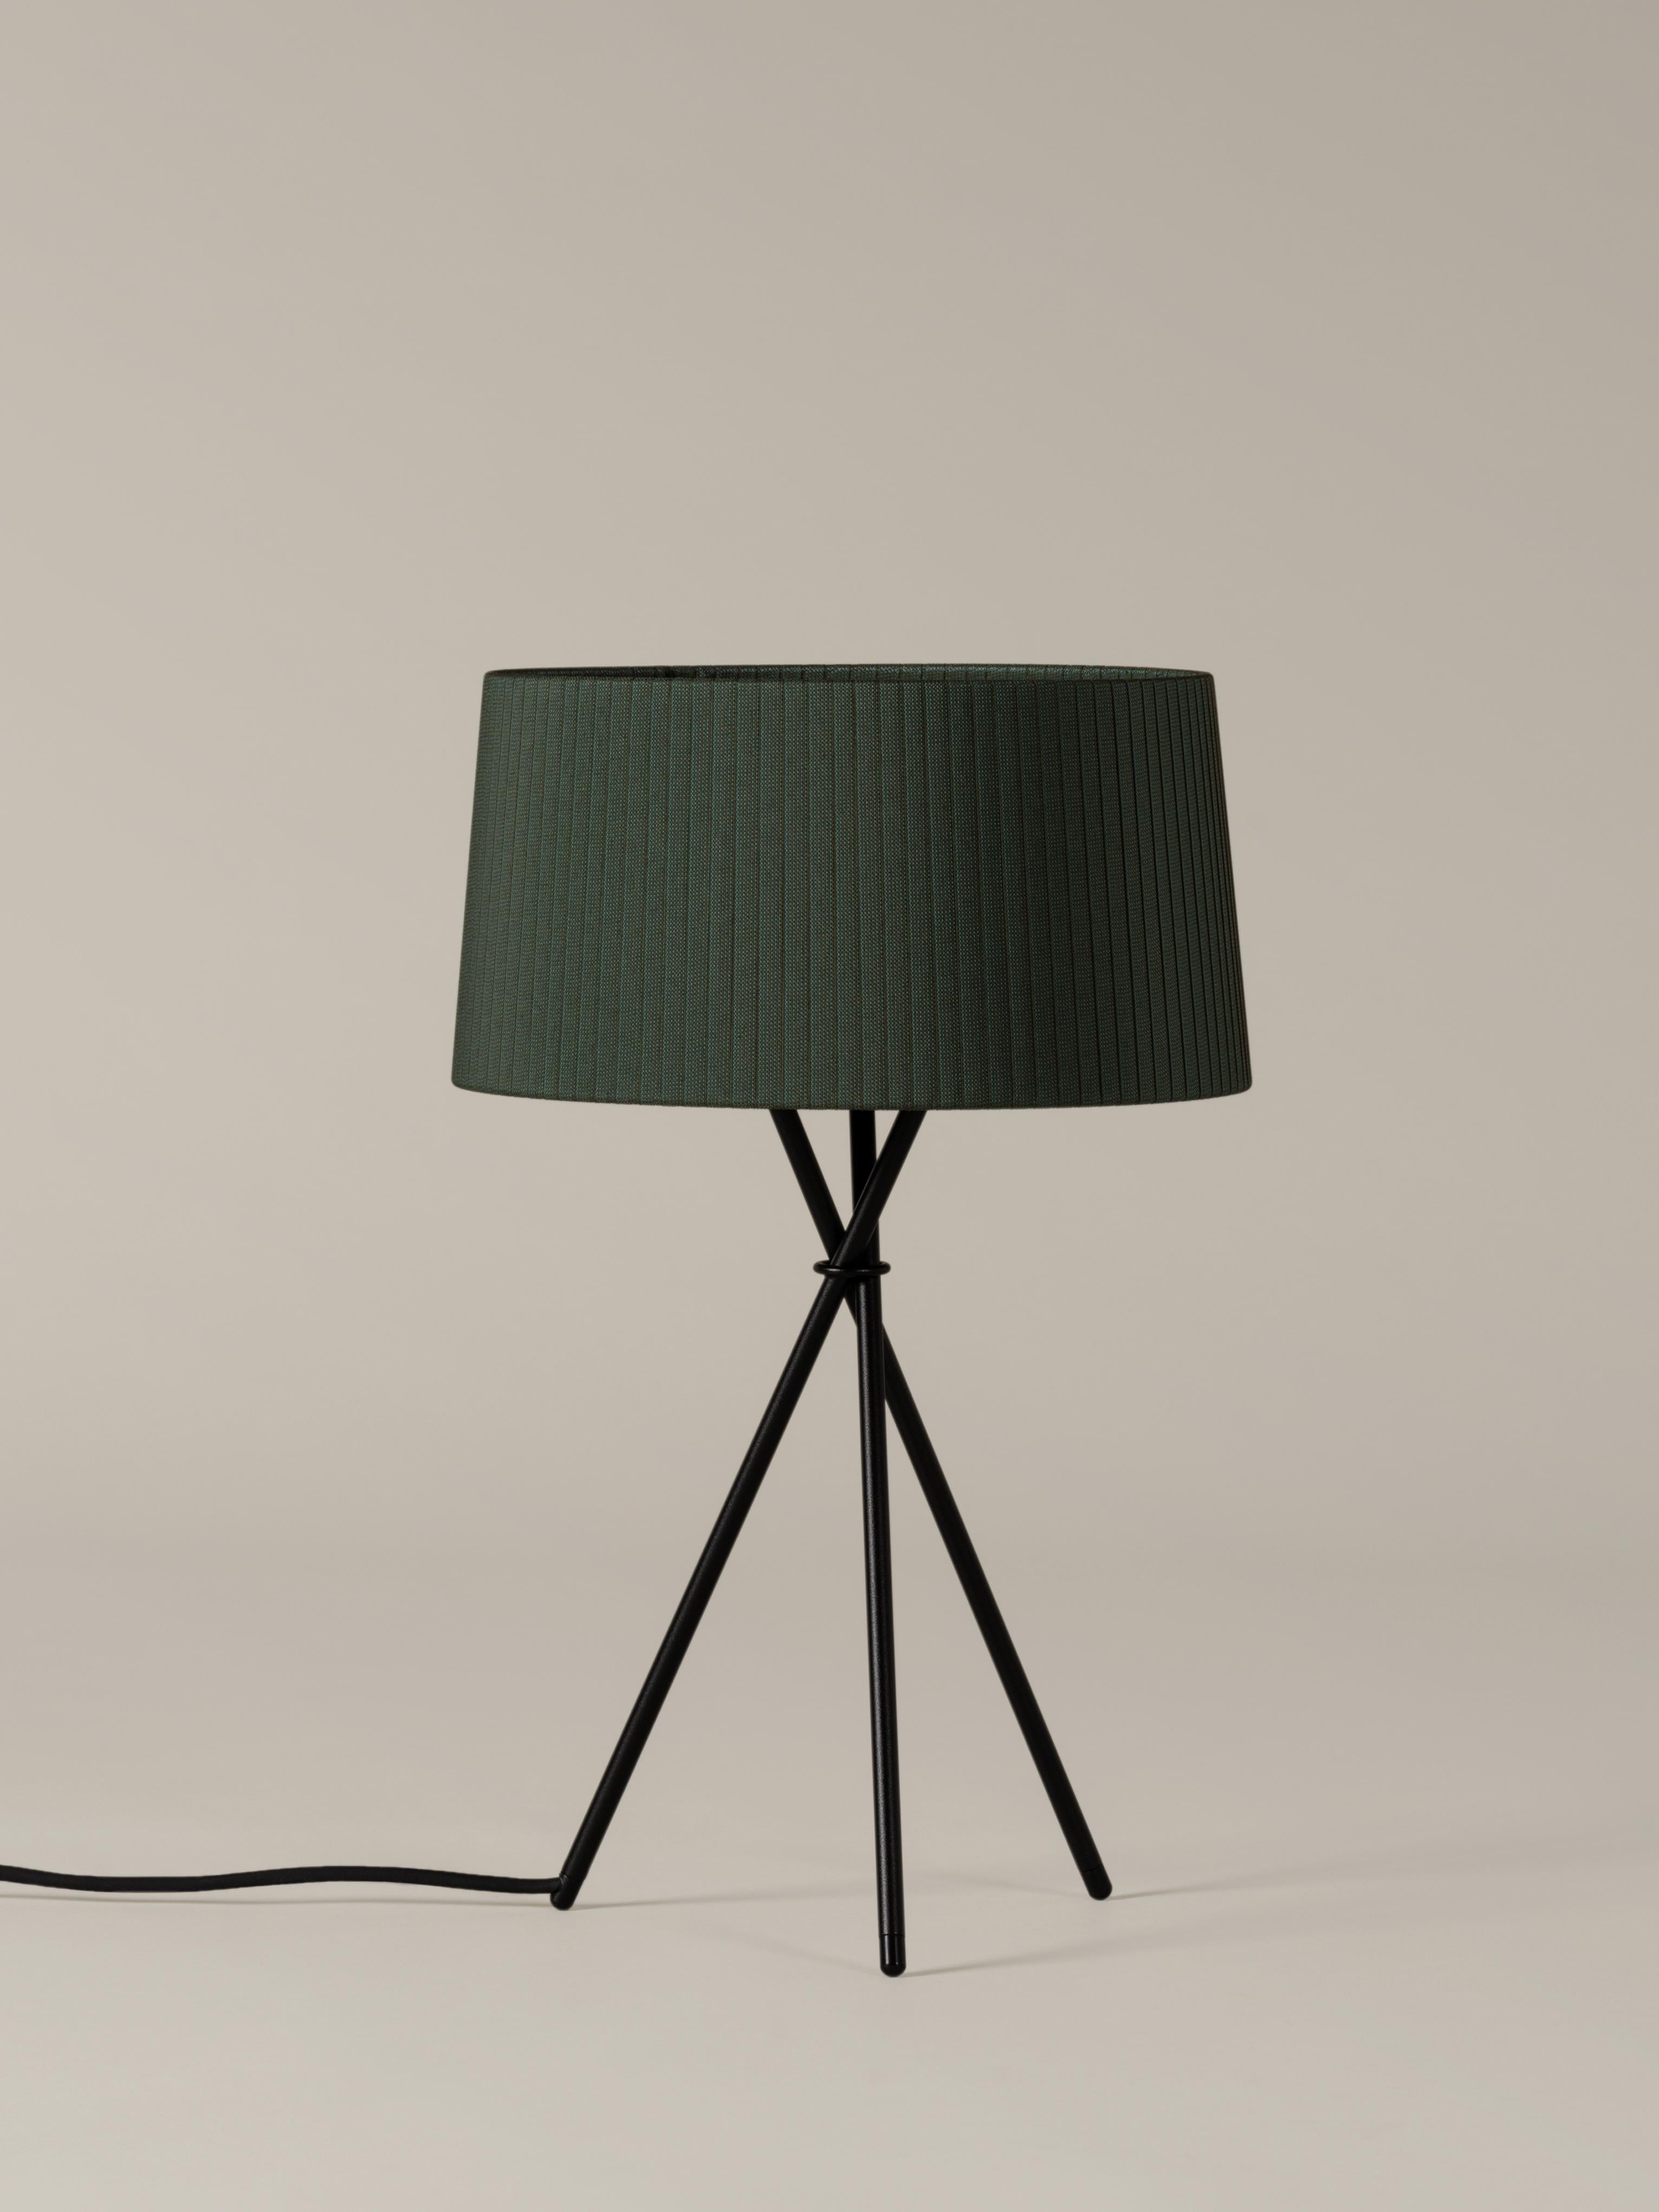 Green Trípode M3 table lamp by Santa & Cole
Dimensions: D 31 x H 50 cm
Materials: metal, ribbon.
Available in other colors.

Trípode humanises neutral spaces with its colourful and functional sobriety. The shade is hand ribboned and its base